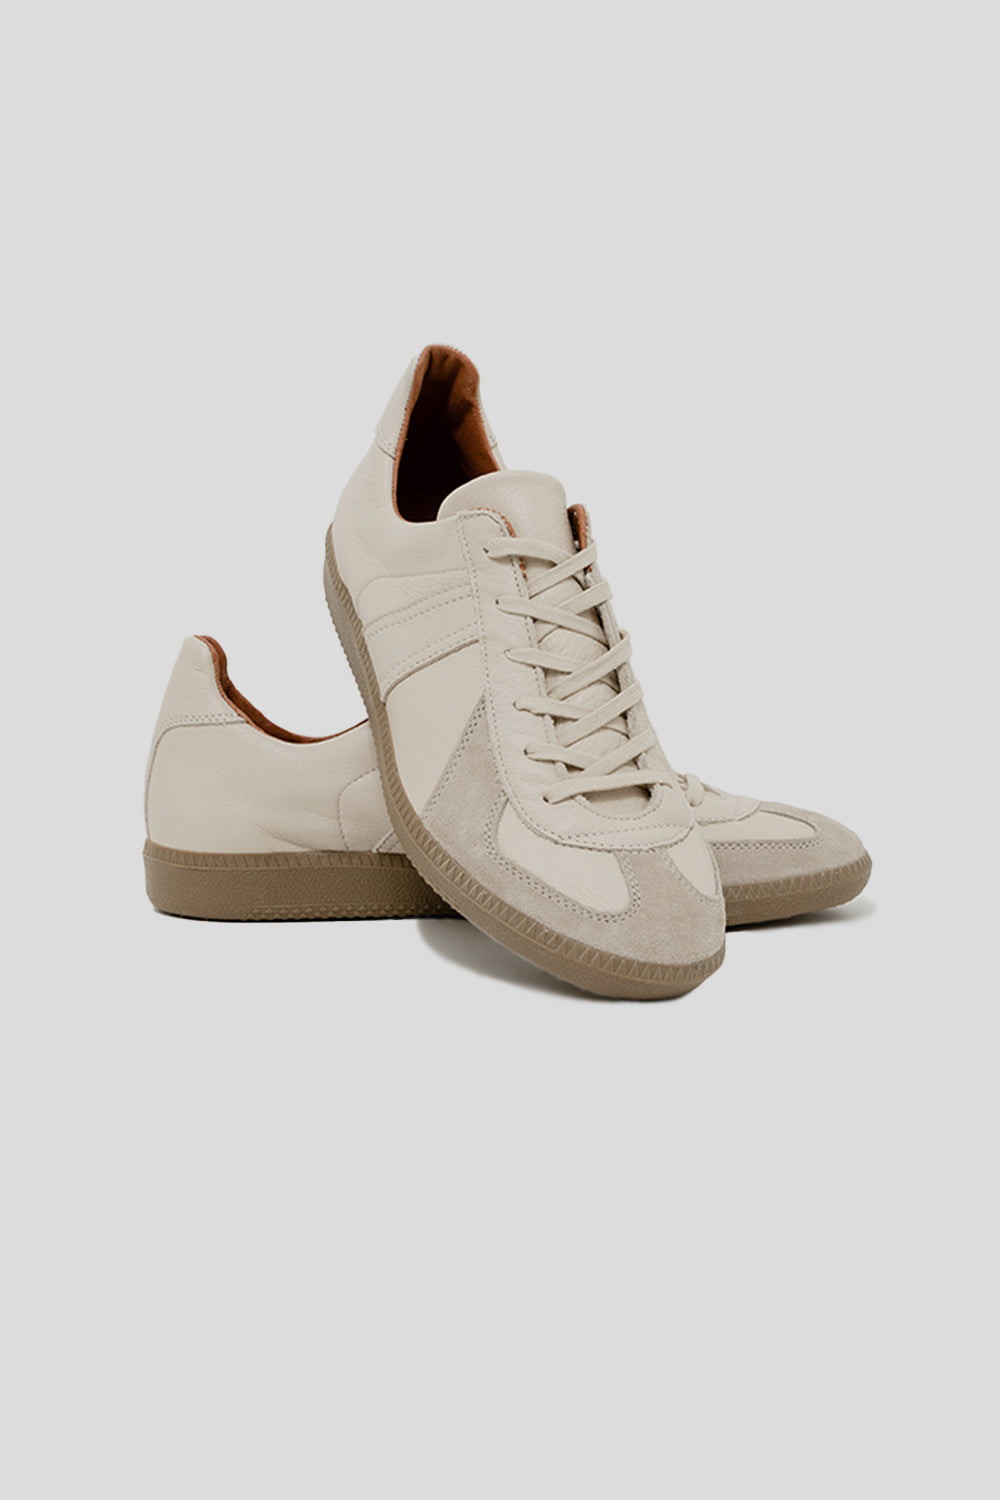 Reproduction of Found WMNS German Military Trainer Shoe in Panna